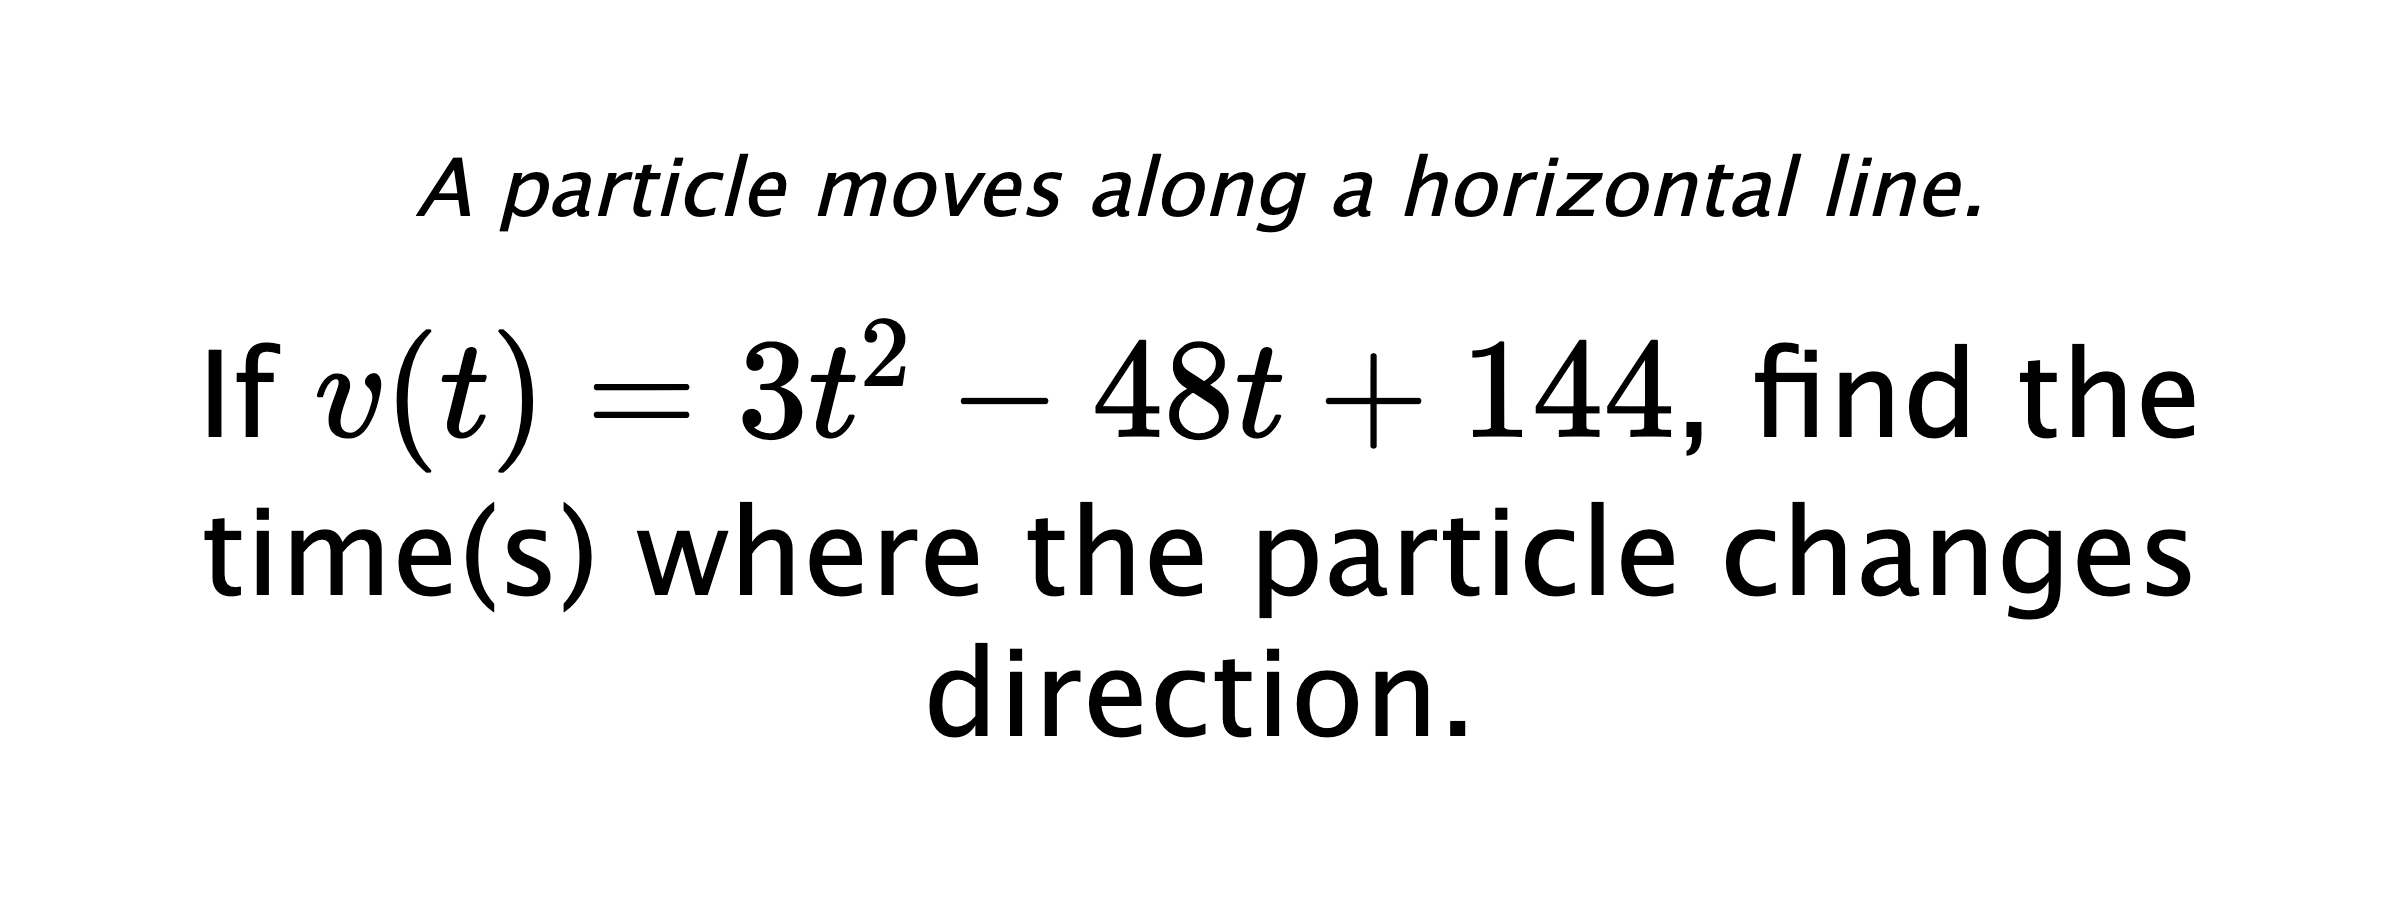 A particle moves along a horizontal line. If $ v(t)=3t^2-48t+144 $, find the time(s) where the particle changes direction.